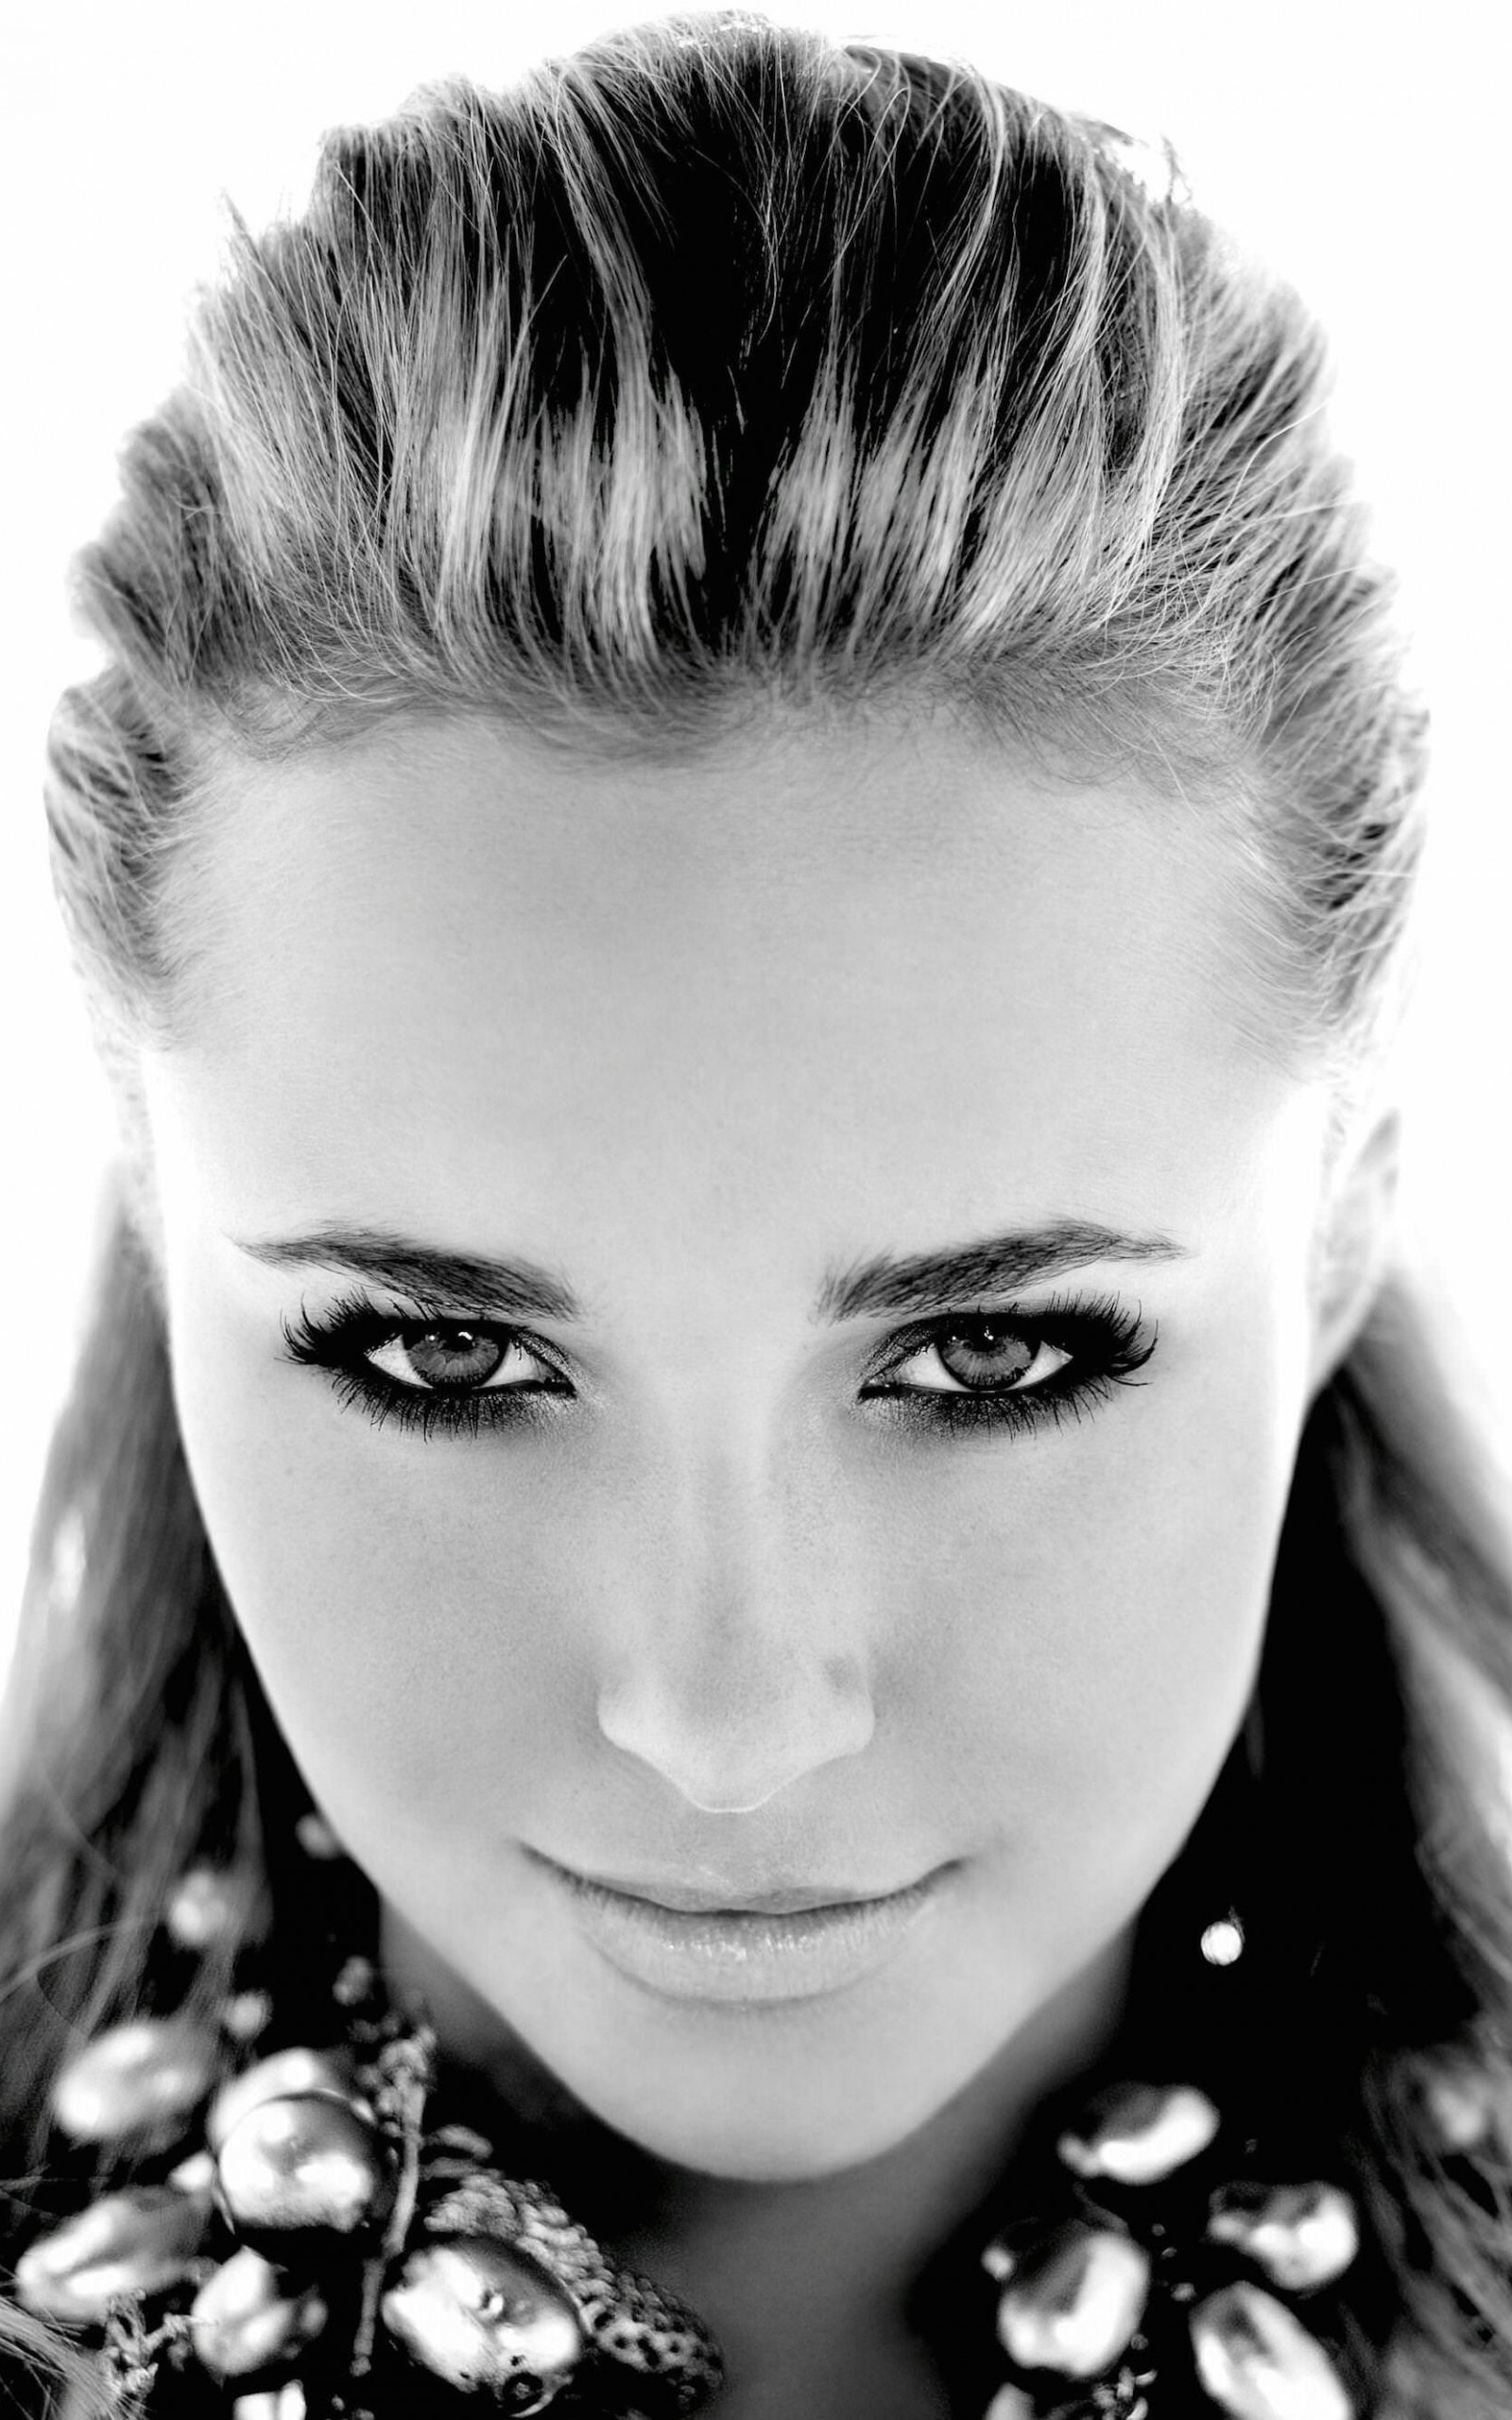 Hayden Panettiere In Black & White Wallpaper for Amazon Kindle Fire HDX 8.9